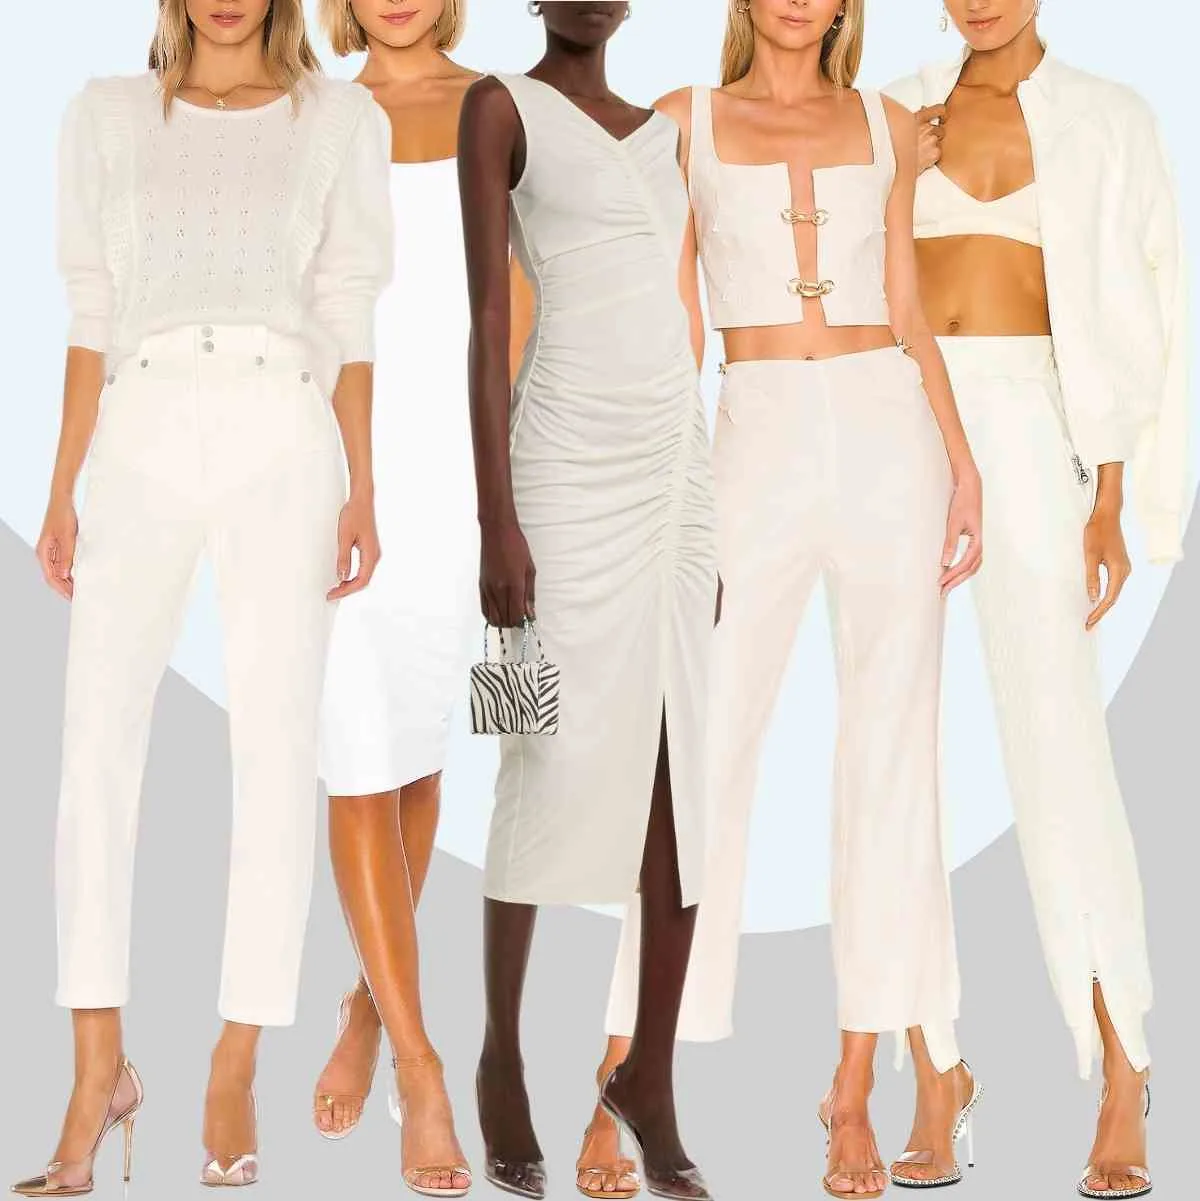 Collage of 5 women wearing clear heel outfits with white clothing.